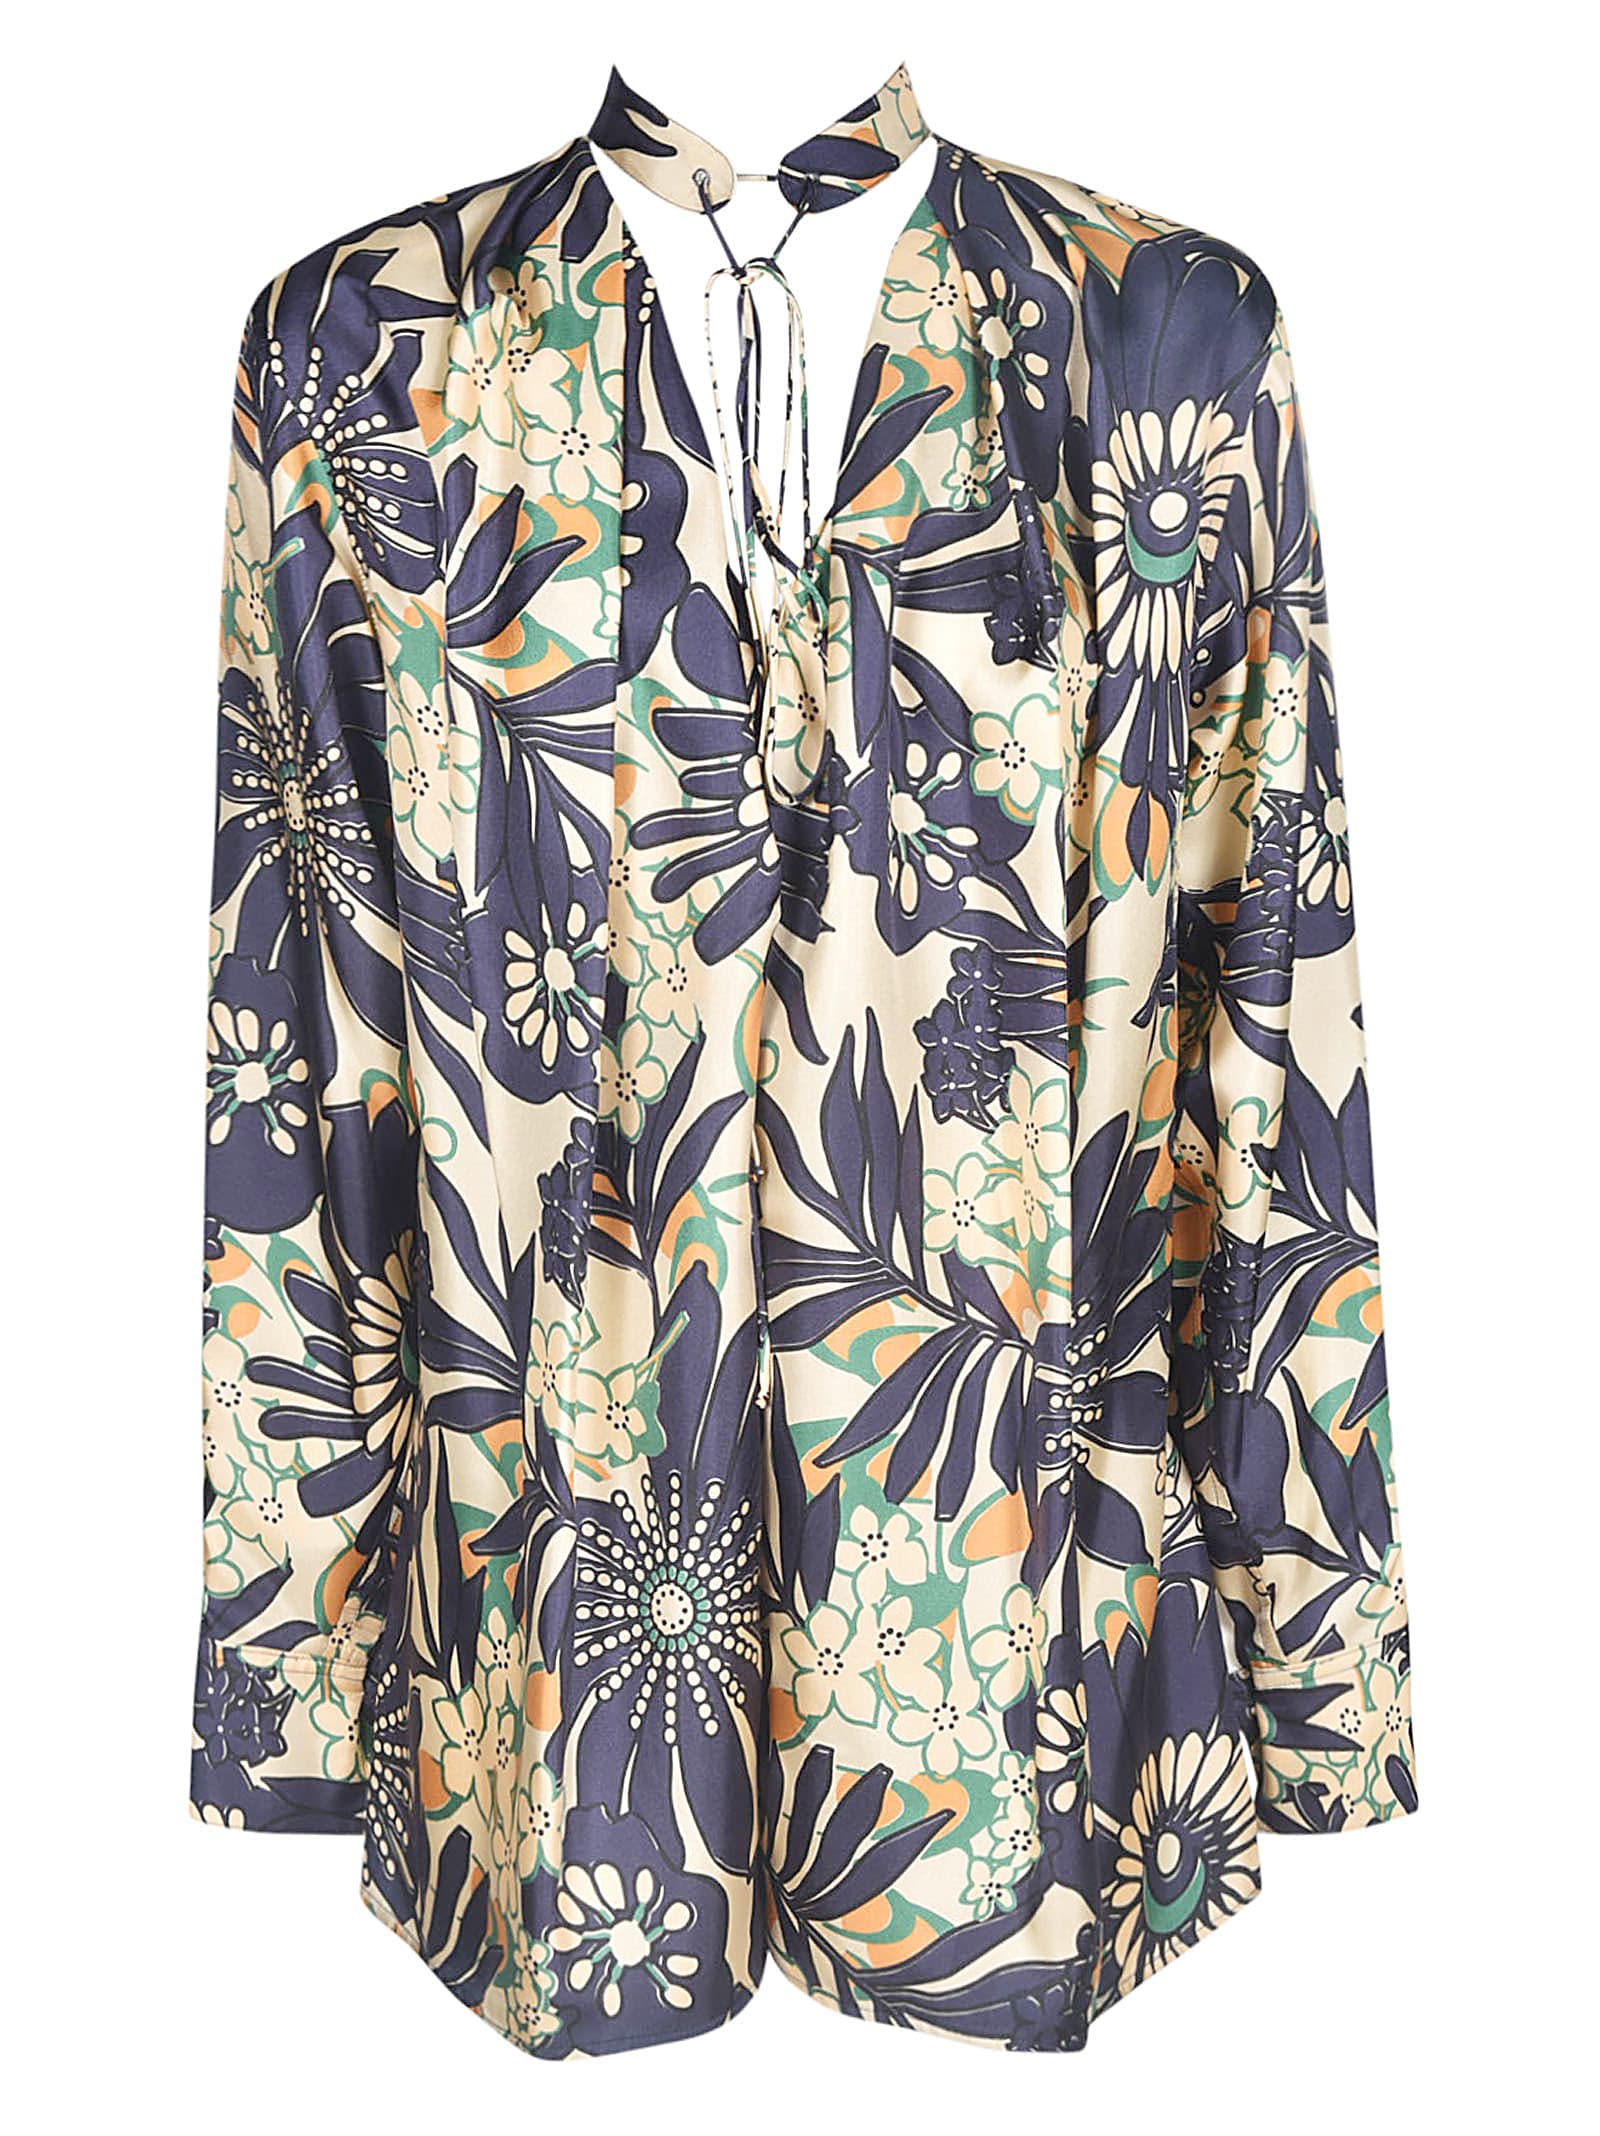 VICTORIA BECKHAM FLORAL PRINTED BLOUSE,1320WSH001694A BISCUIT NAVY